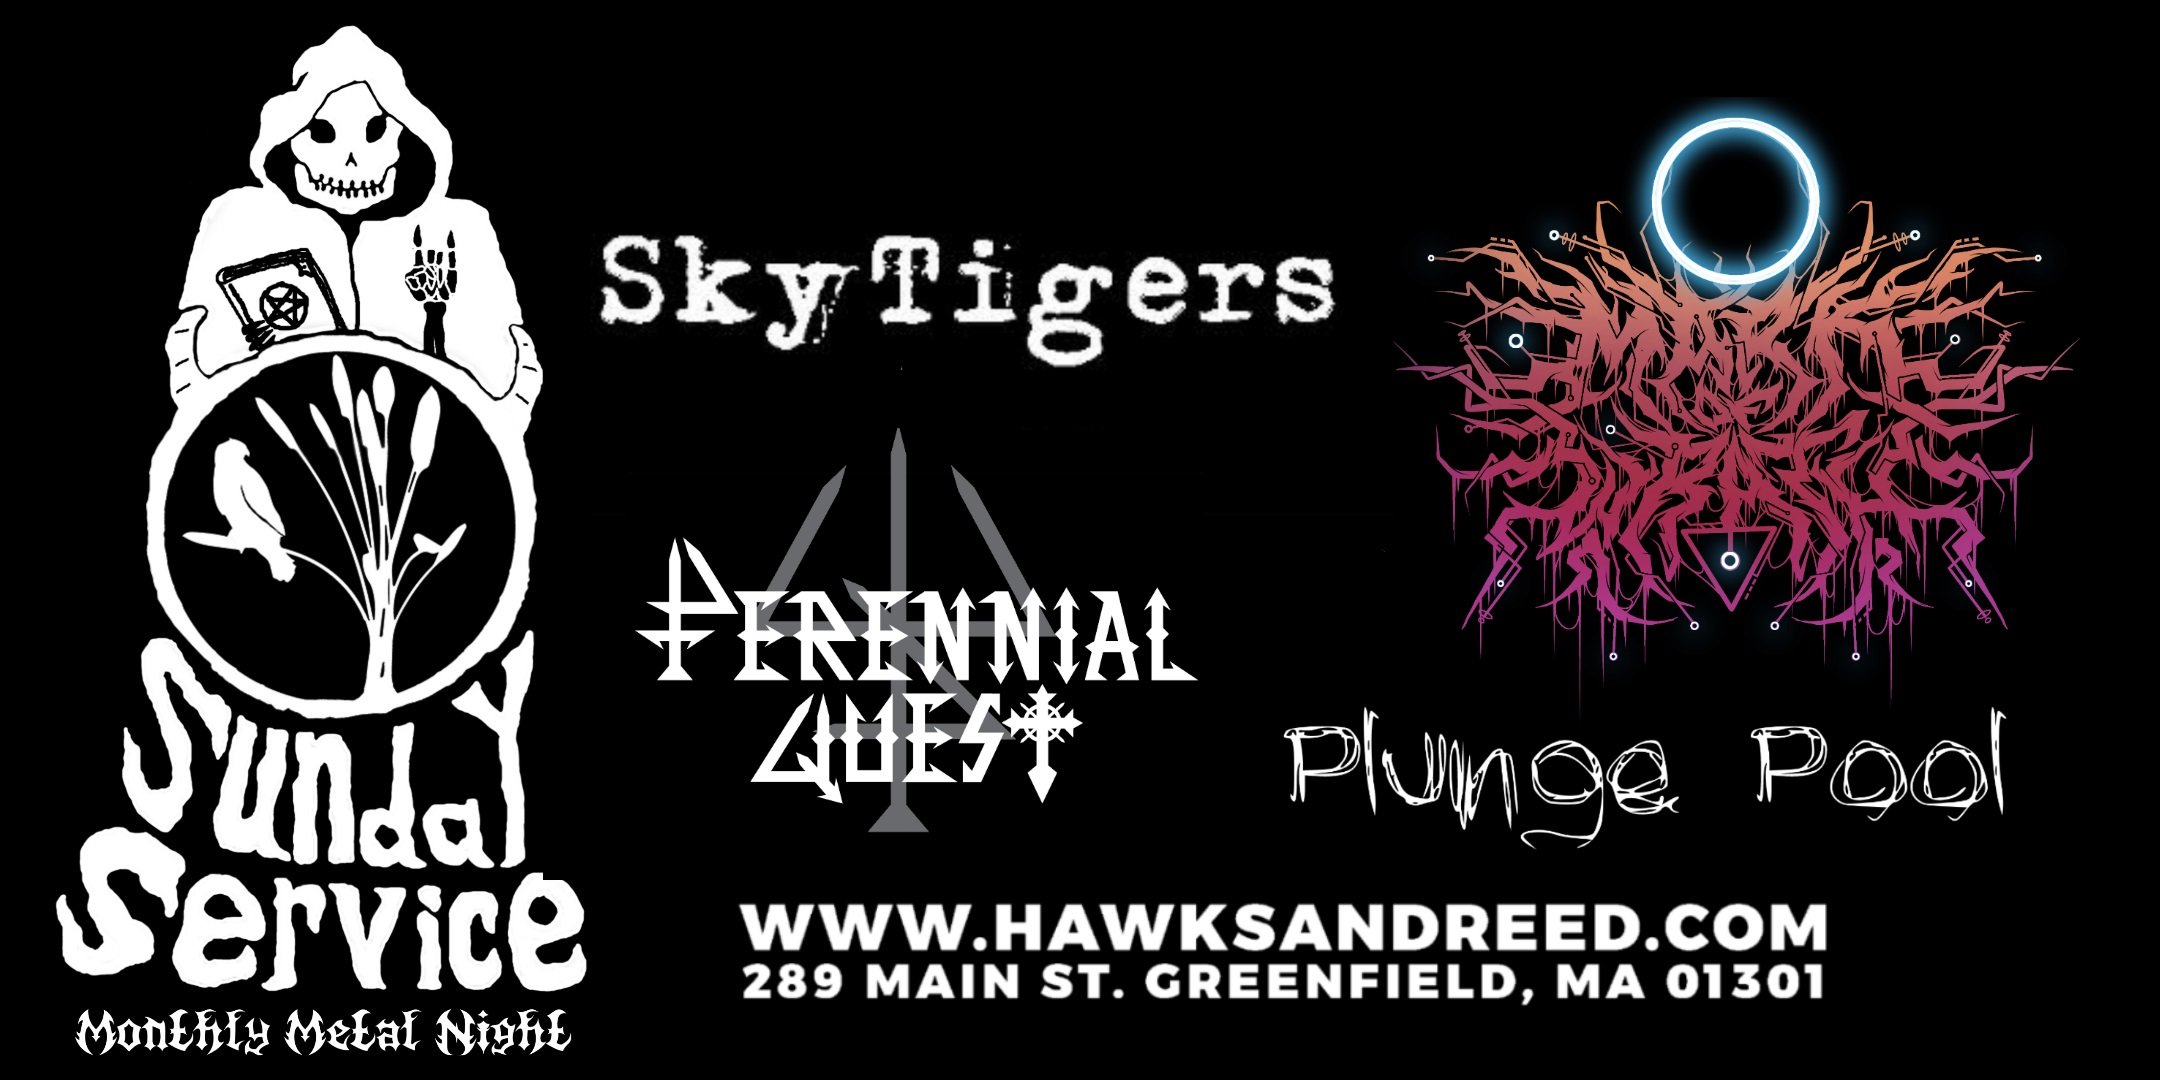 Sunday Service ft. Plunge Pool / Mark of Wrath / Perennial Quest / Skytigers